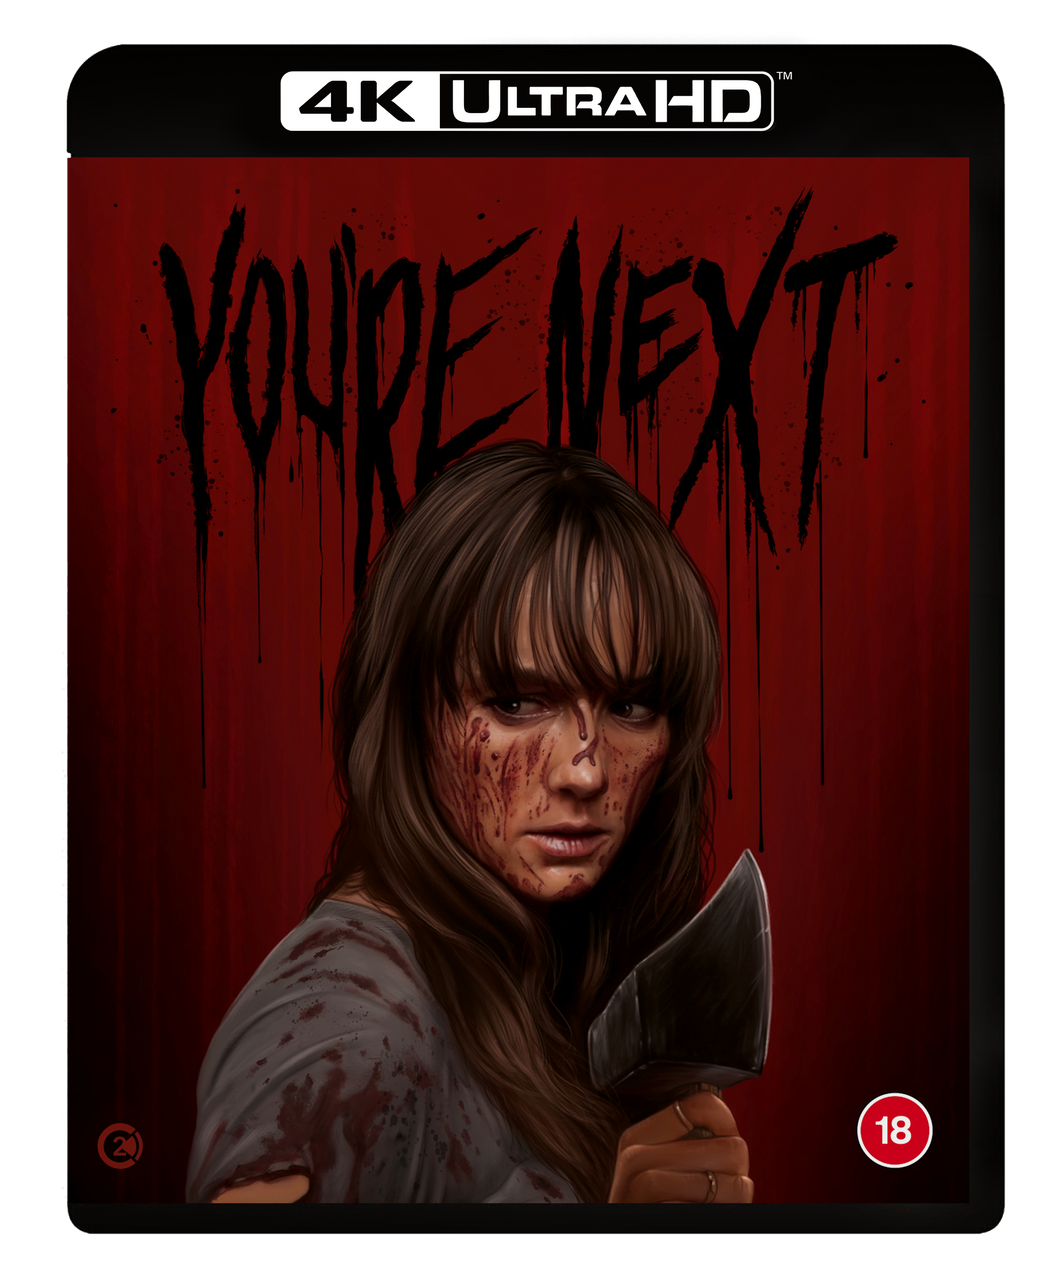 You're Next 4K UHD: Pre-order Available 19th August